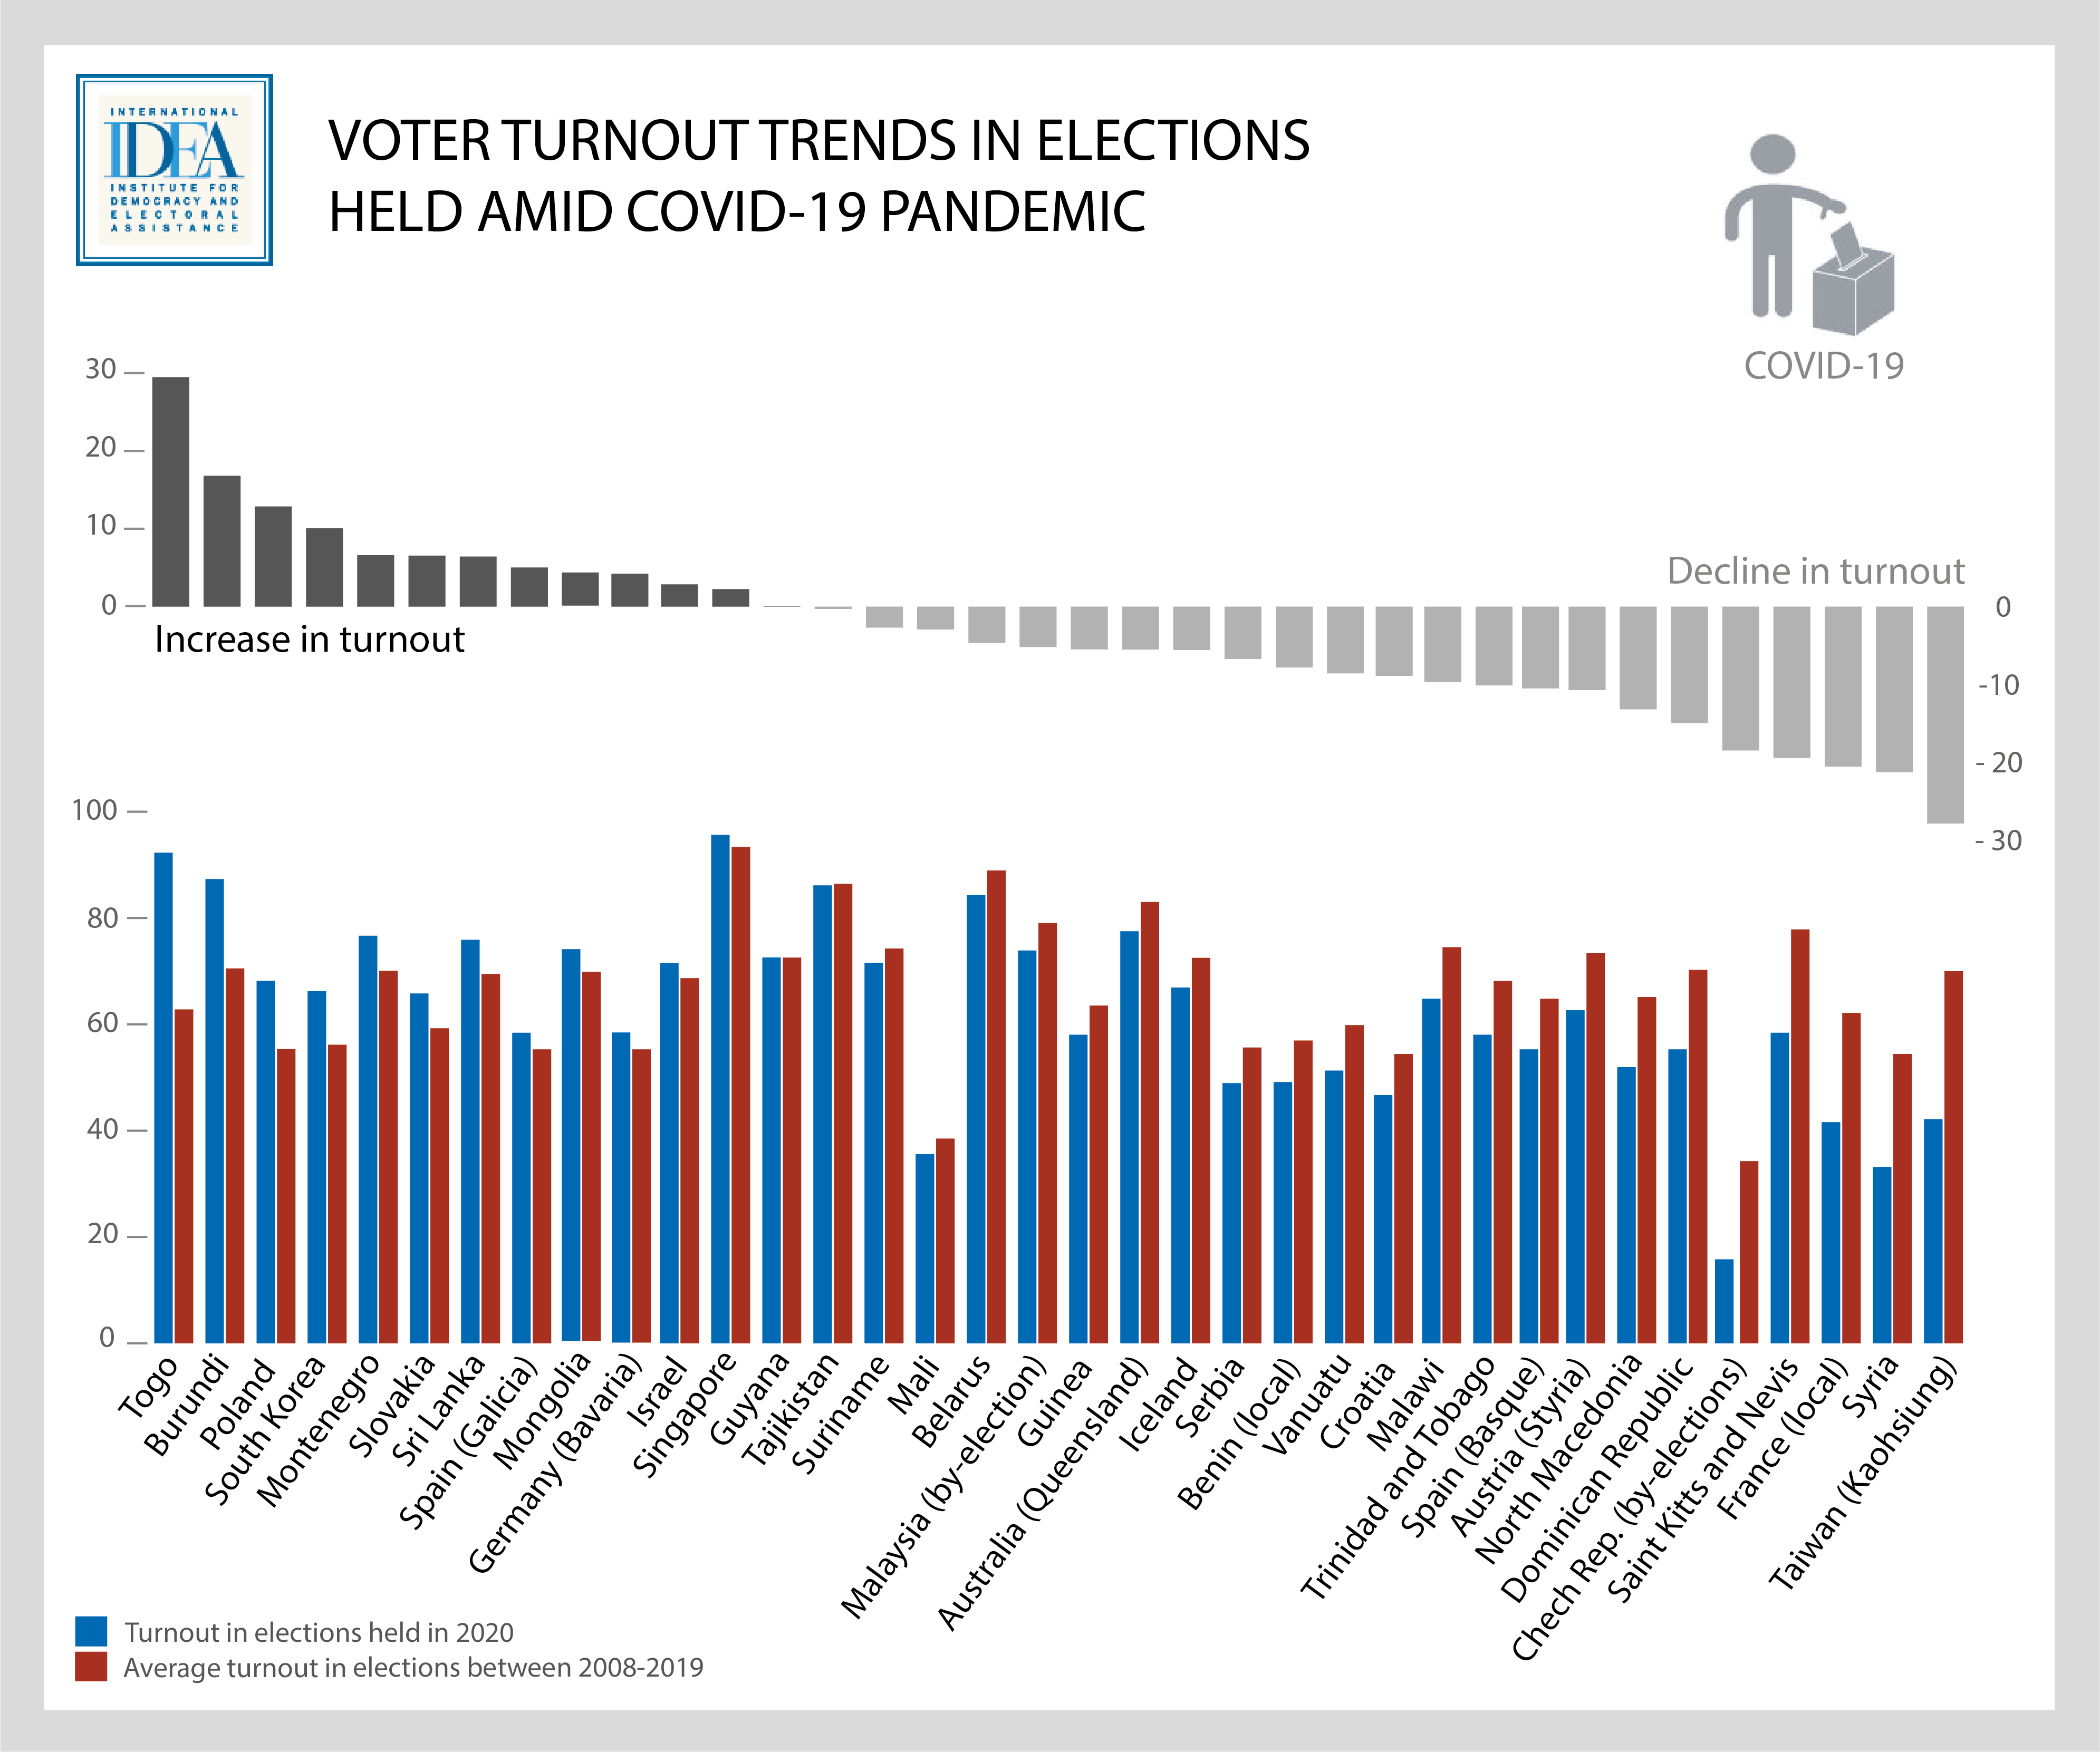 Going against the trend: elections with increased voter turnout during COVID-19 pandemic | IDEA